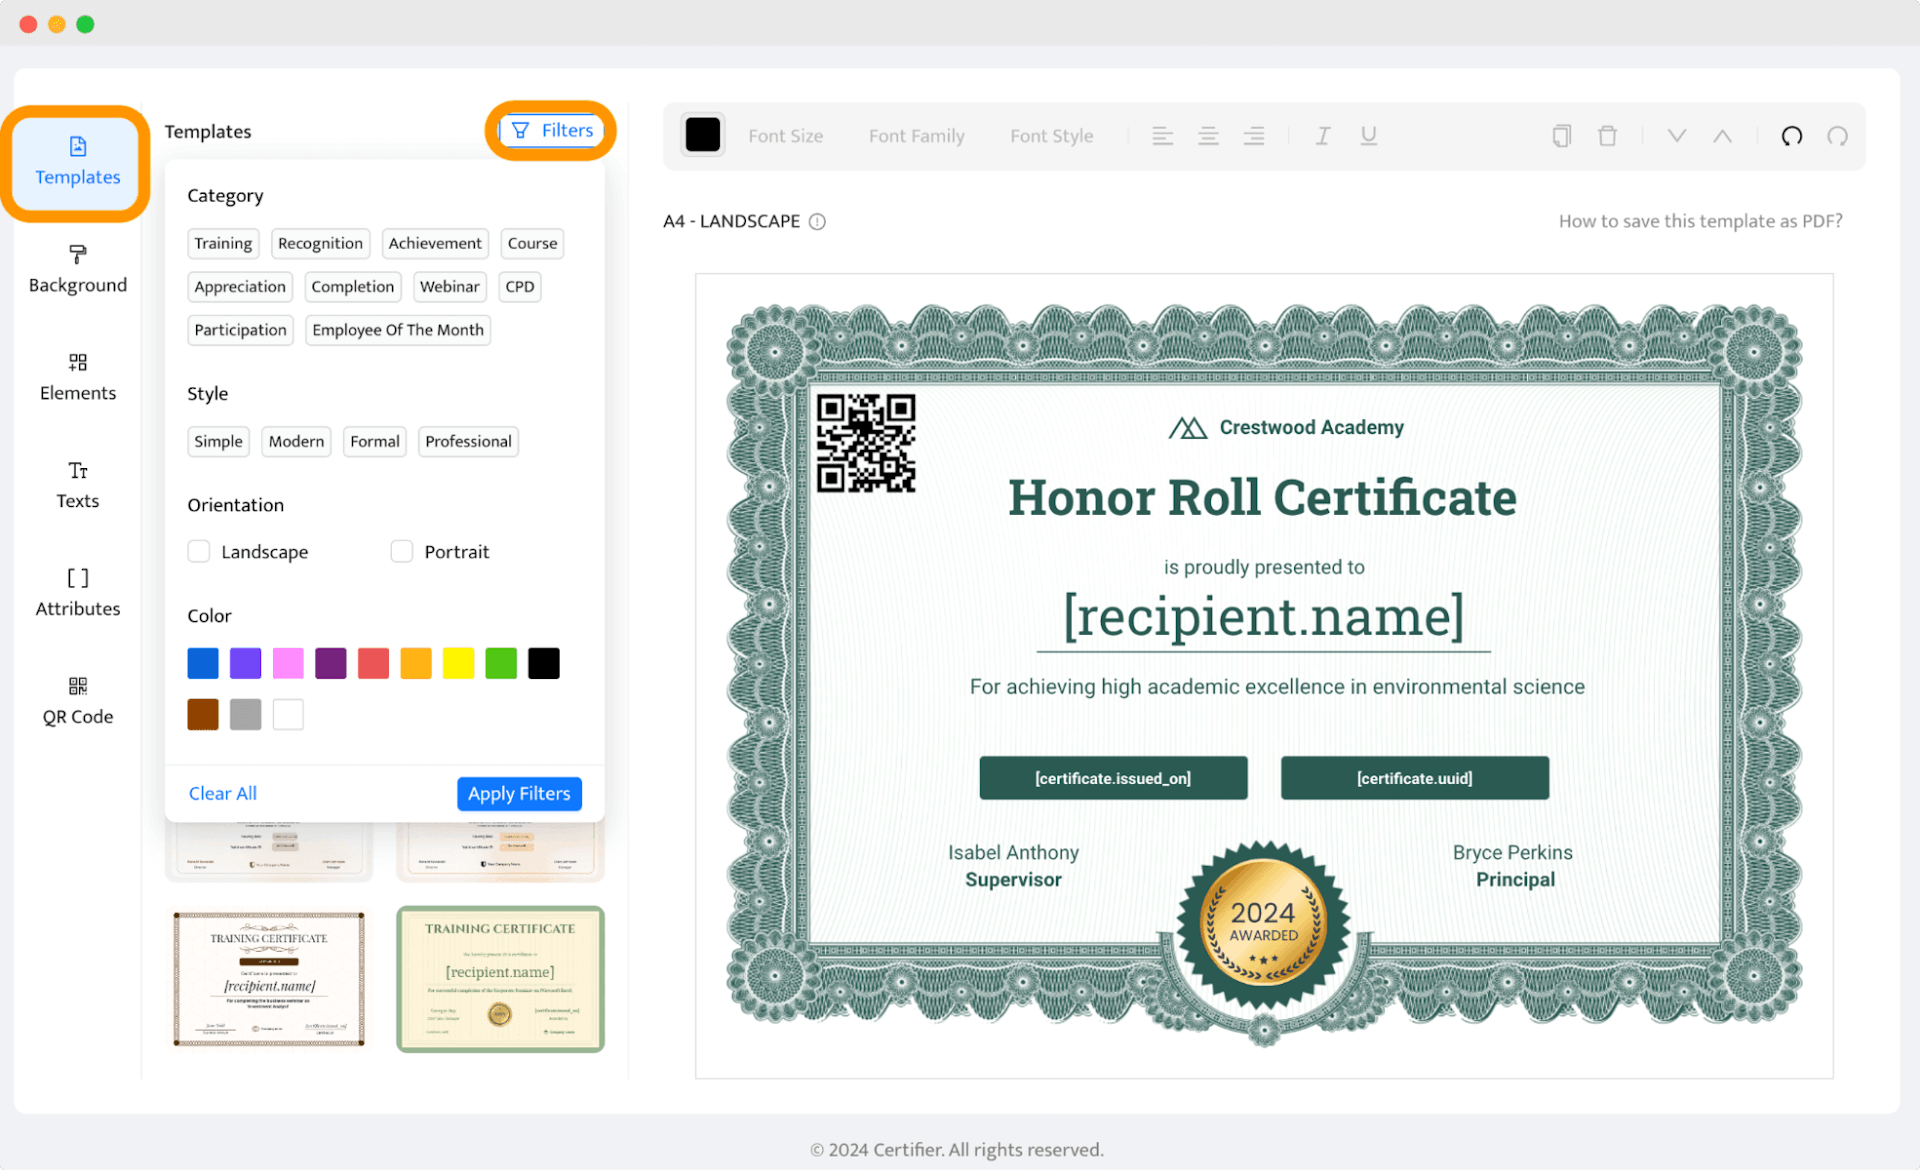 Changing membership certificate templates within the Certifier dashboard.